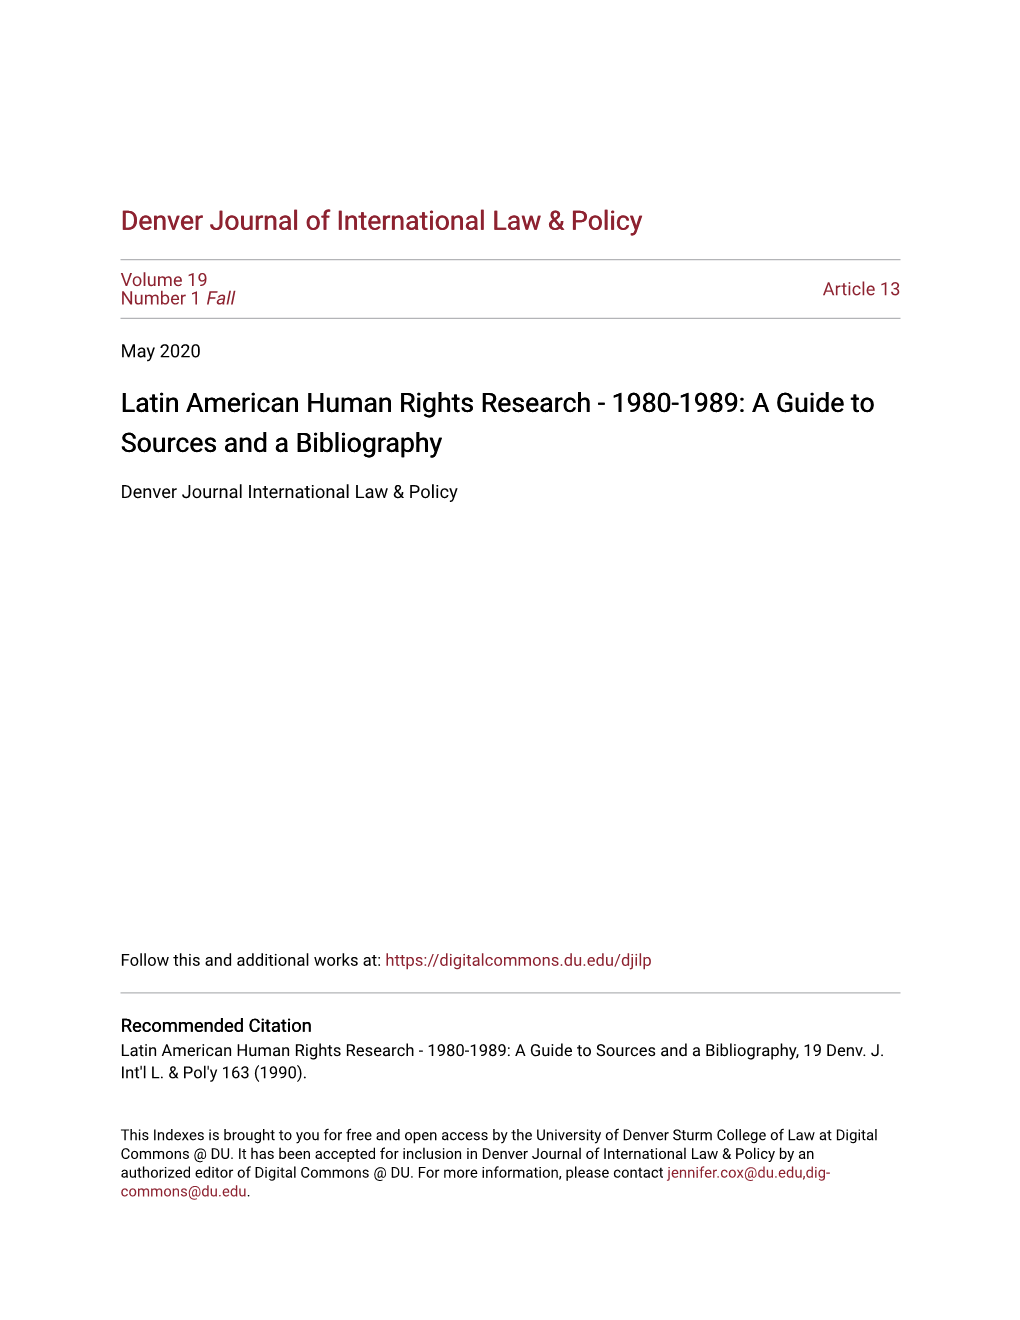 Latin American Human Rights Research - 1980-1989: a Guide to Sources and a Bibliography